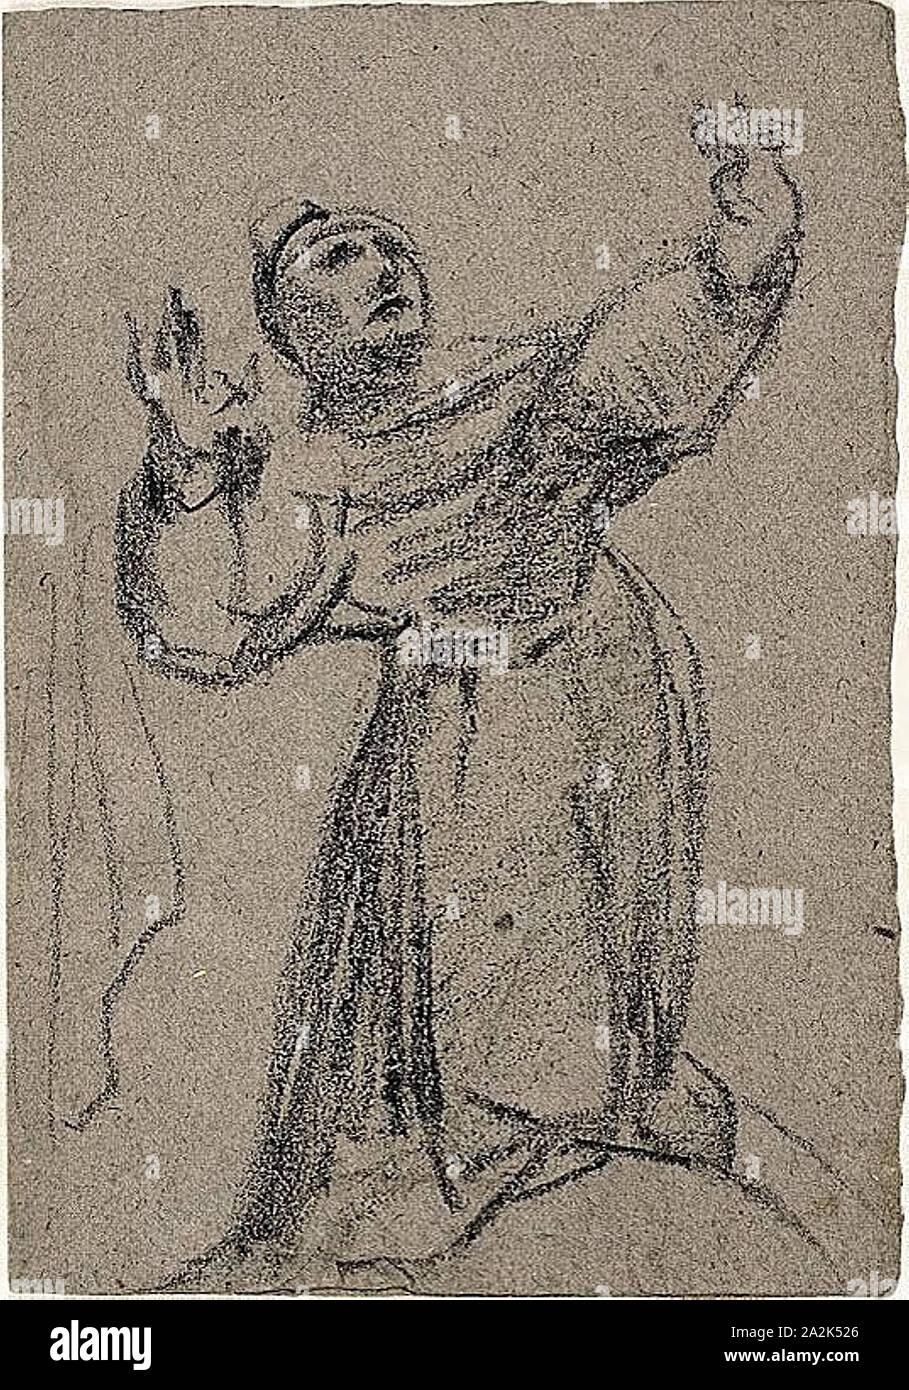 Kneeling Figure with Arms Raised, n.d., Jean Baptiste Carpeaux, French, 1827-1875, France, Black crayon on gray laid paper, 158 × 219 mm Stock Photo